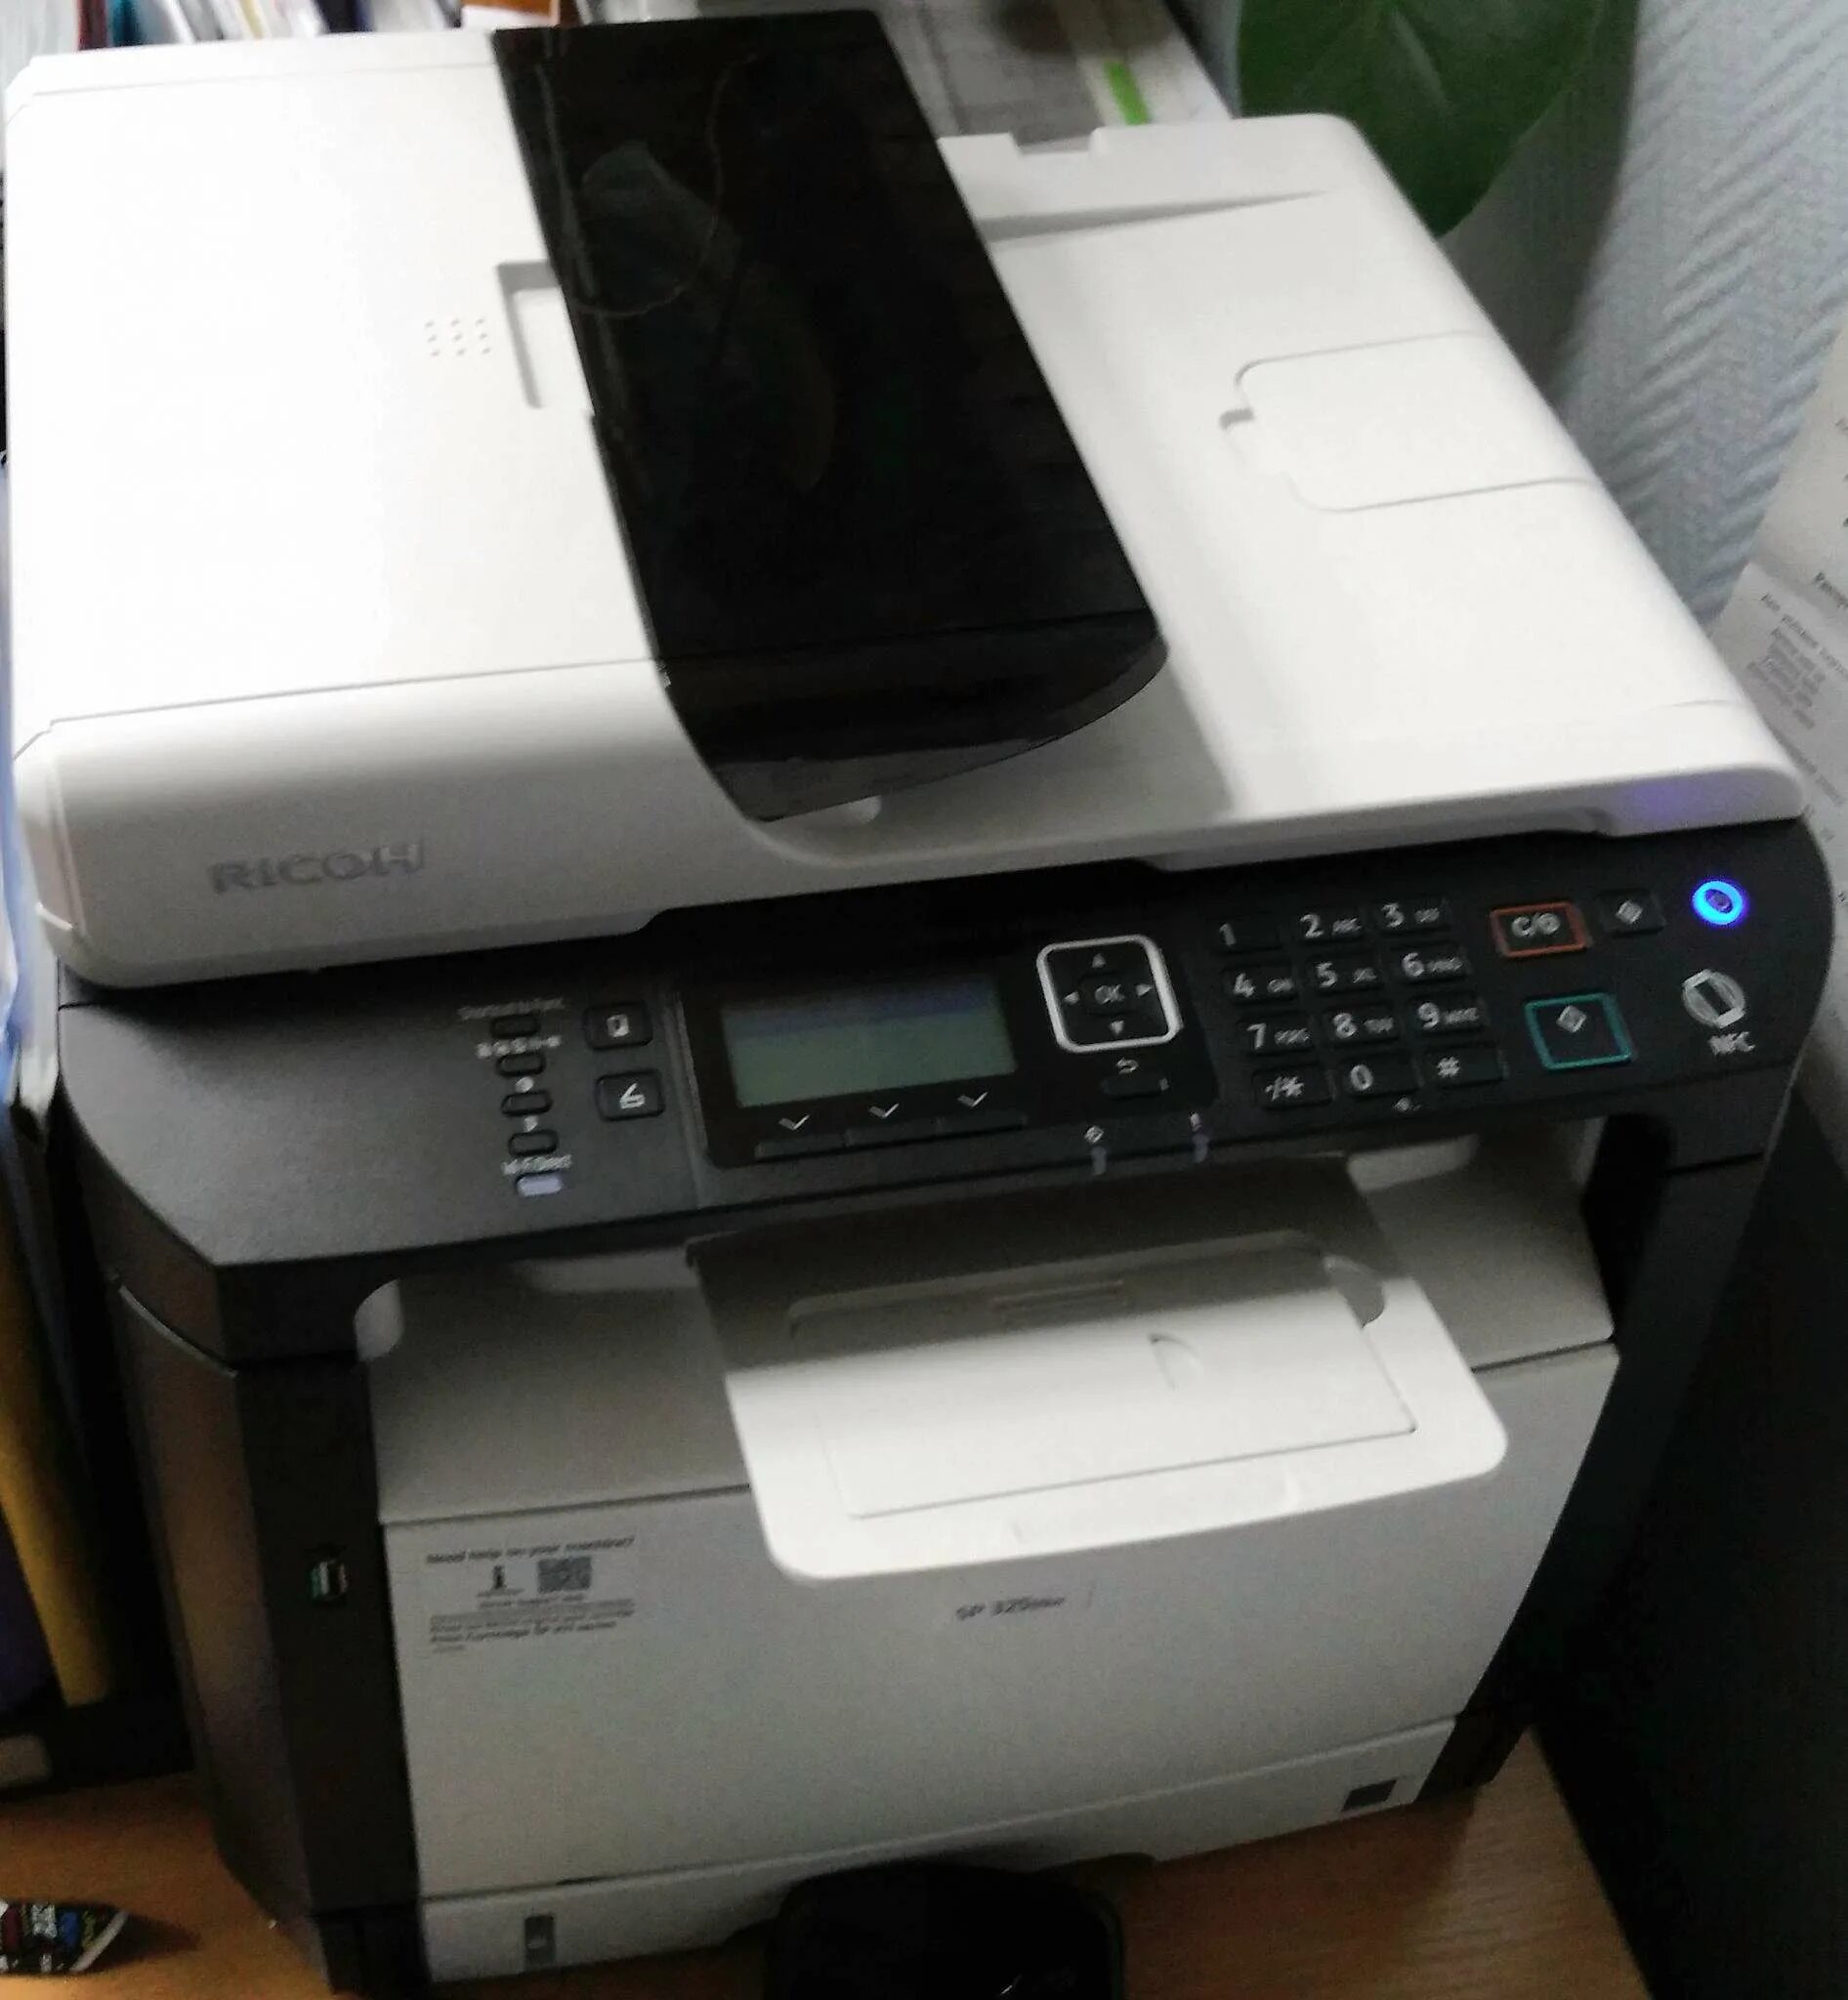 Ricoh sp 325snw. МФУ Рикон SP 325snw. Принтер Ricoh SP 325snw. Ricoh 325.